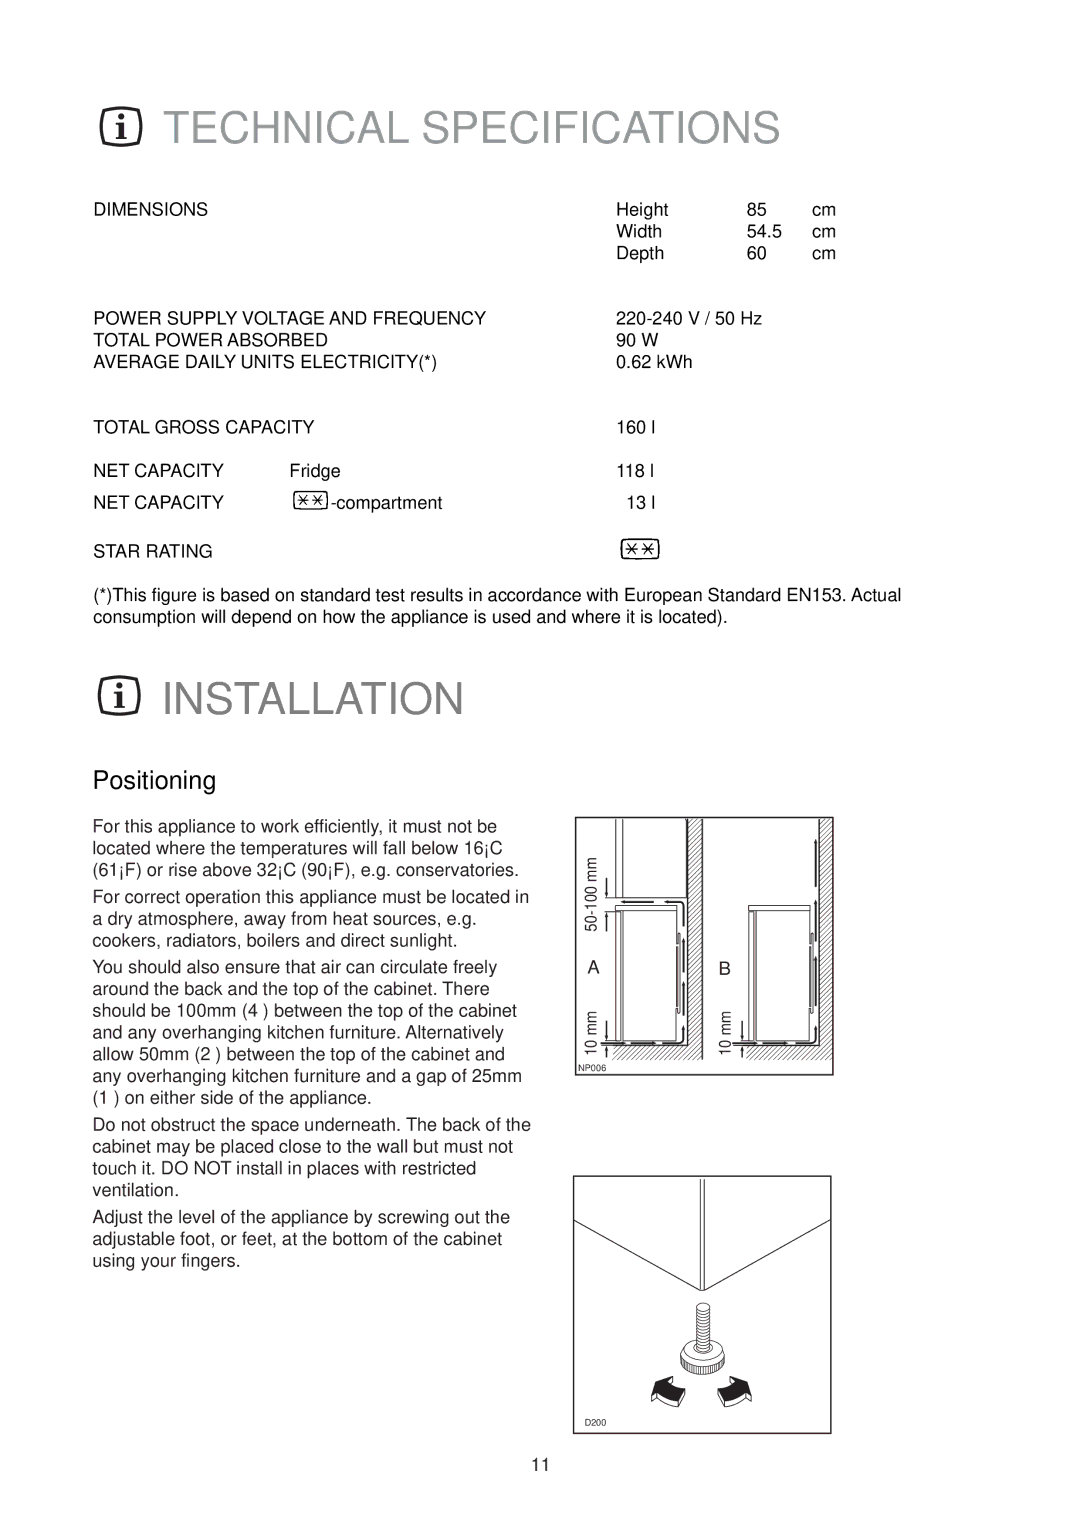 Electrolux ER 1627T manual Technical Specifications, Installation, Positioning 